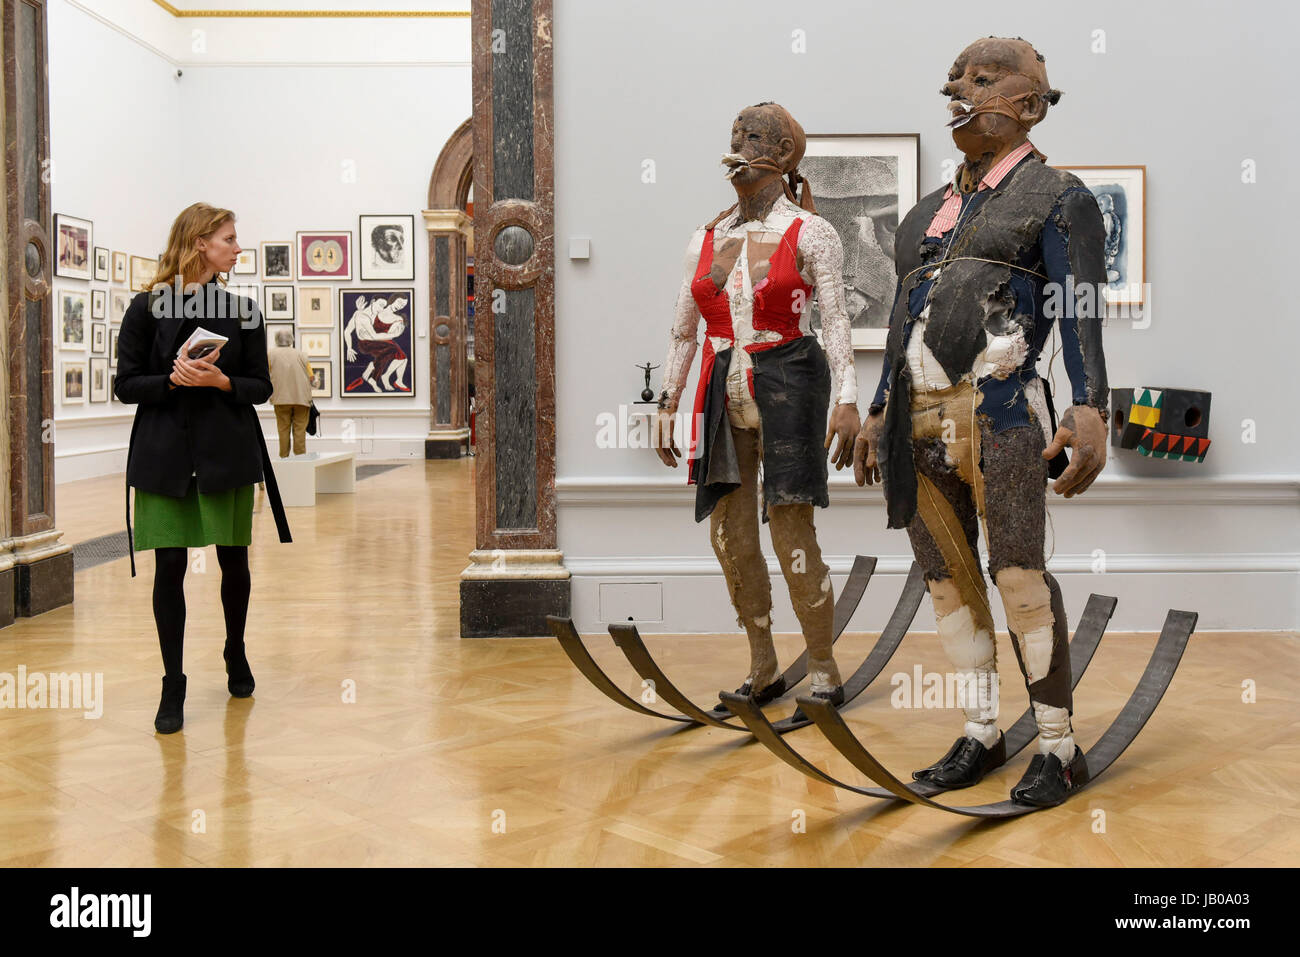 London, UK.  8 June 2017.  A visitor views a sculpture called 'Defending Integrity From The Power That Be' by Tim Shaw RA.  Preview of the Summer Exhibition 2017 at the Royal Academy of Arts in Piccadilly.  Co-ordinated by Royal Academician Eileen Cooper, the 249th Summer Exhibition is the world's largest open submission exhibition with around 1,100 works on display by high profile and up and coming artists.   Credit: Stephen Chung / Alamy Live News Stock Photo